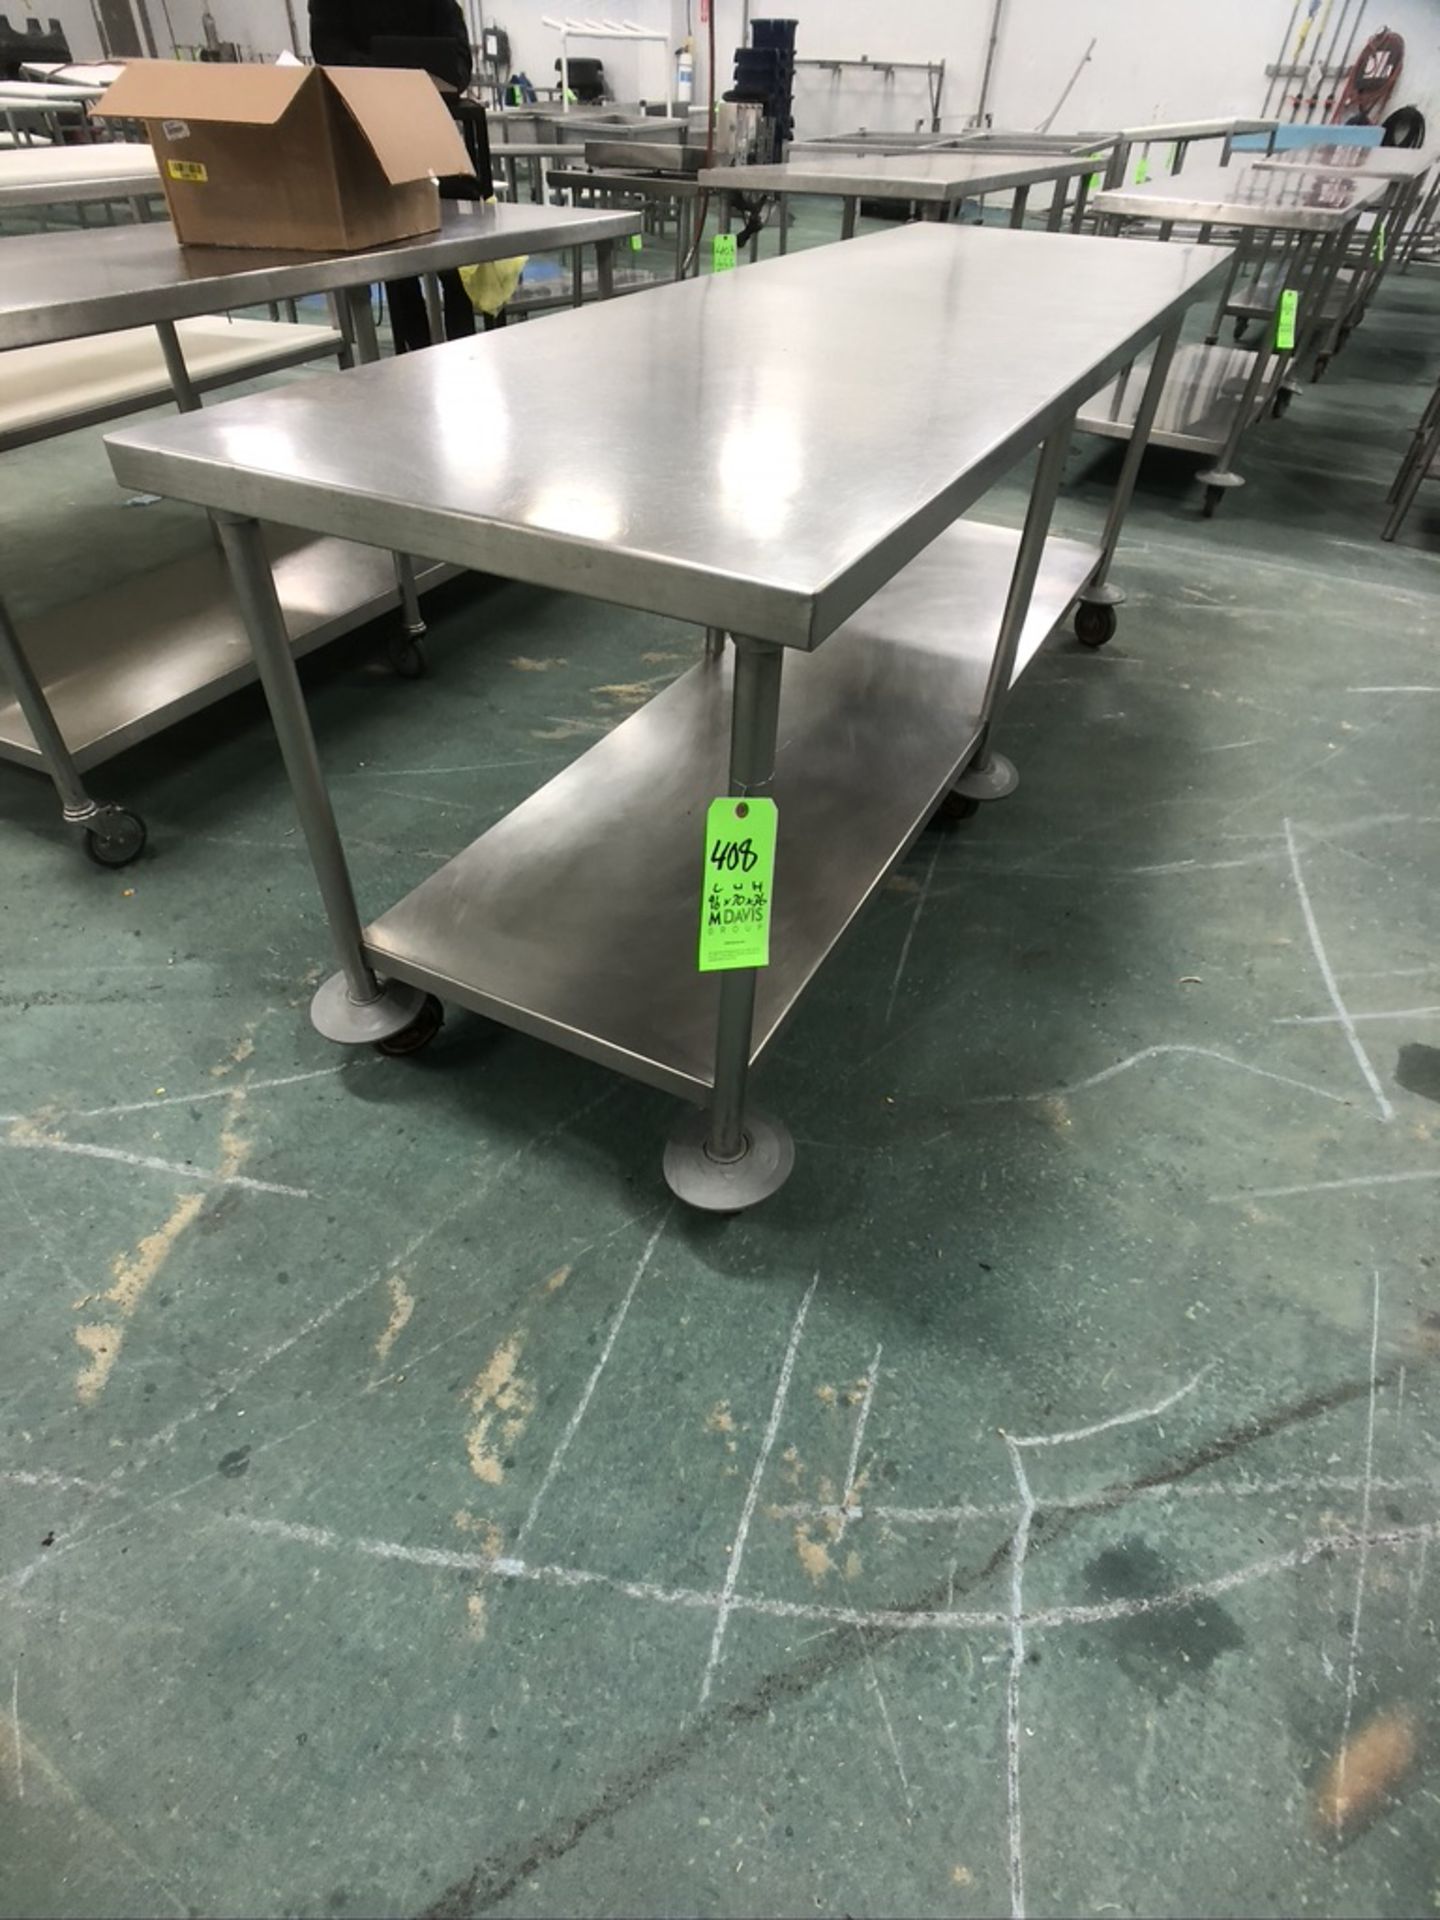 S/S TABLE PORTABLE / MOUNTED ON CASTERS WITH BOTTOM SHELF, APPX DIM. LWH'' 96 X 30 X 36